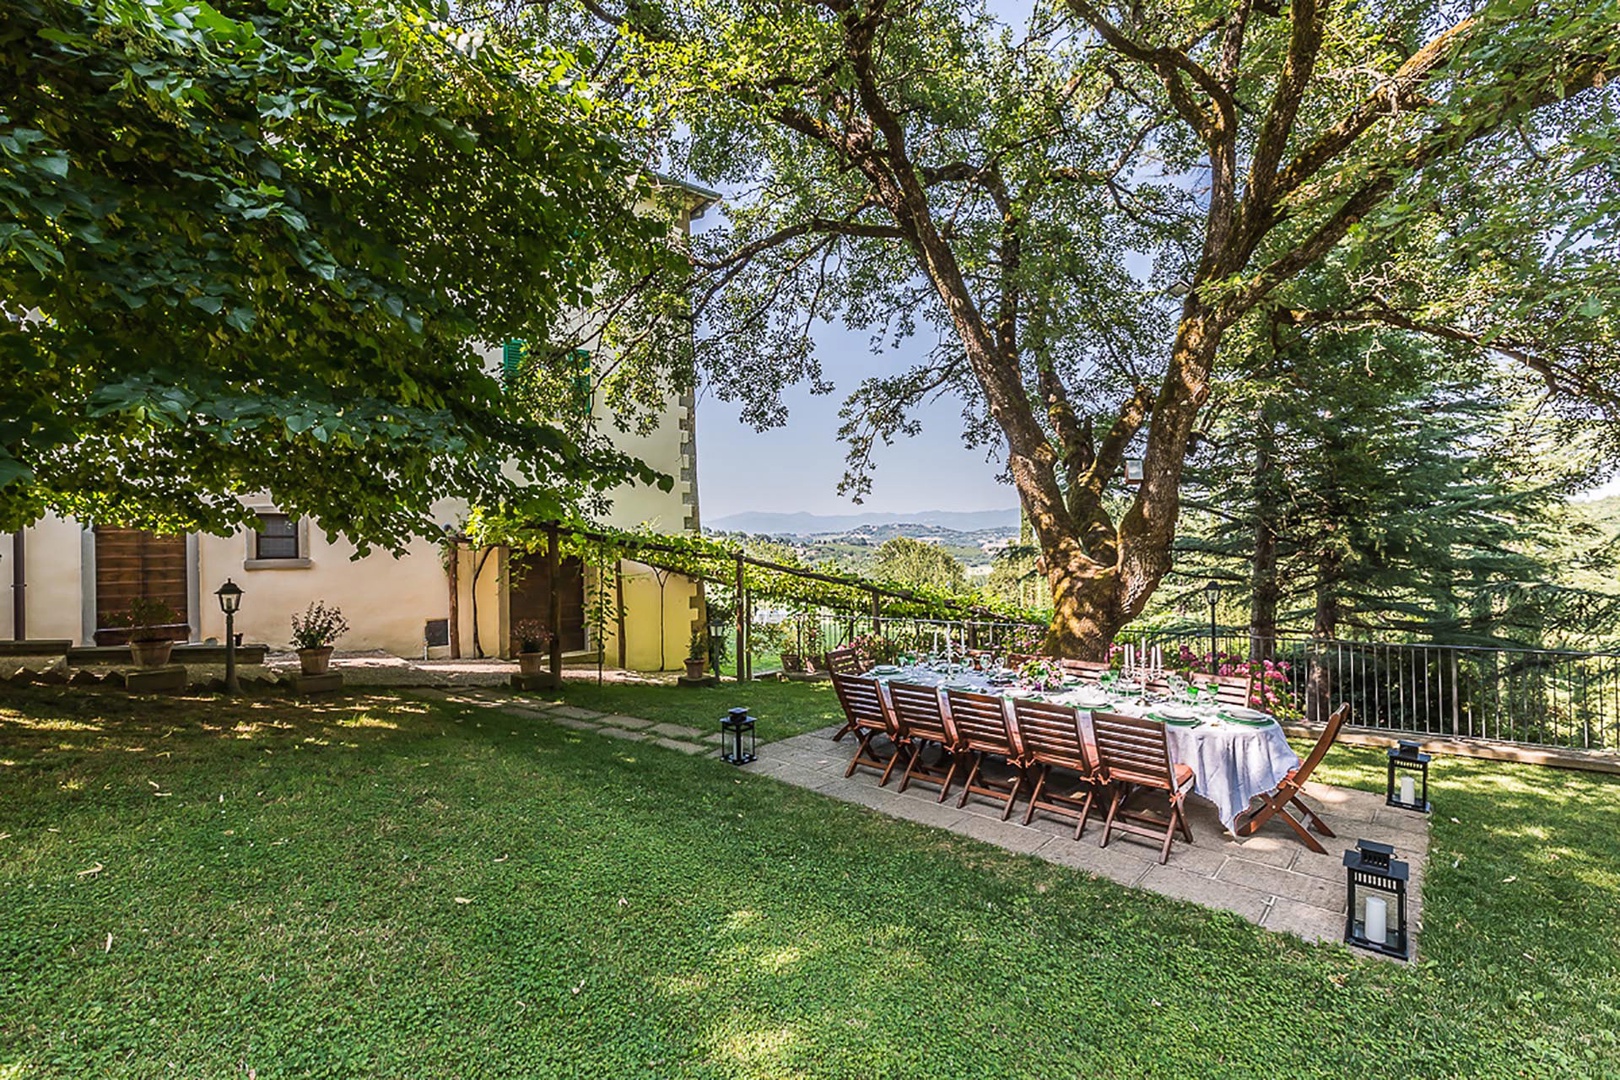 Enjoy the storybook setting of this villa while dining outside.